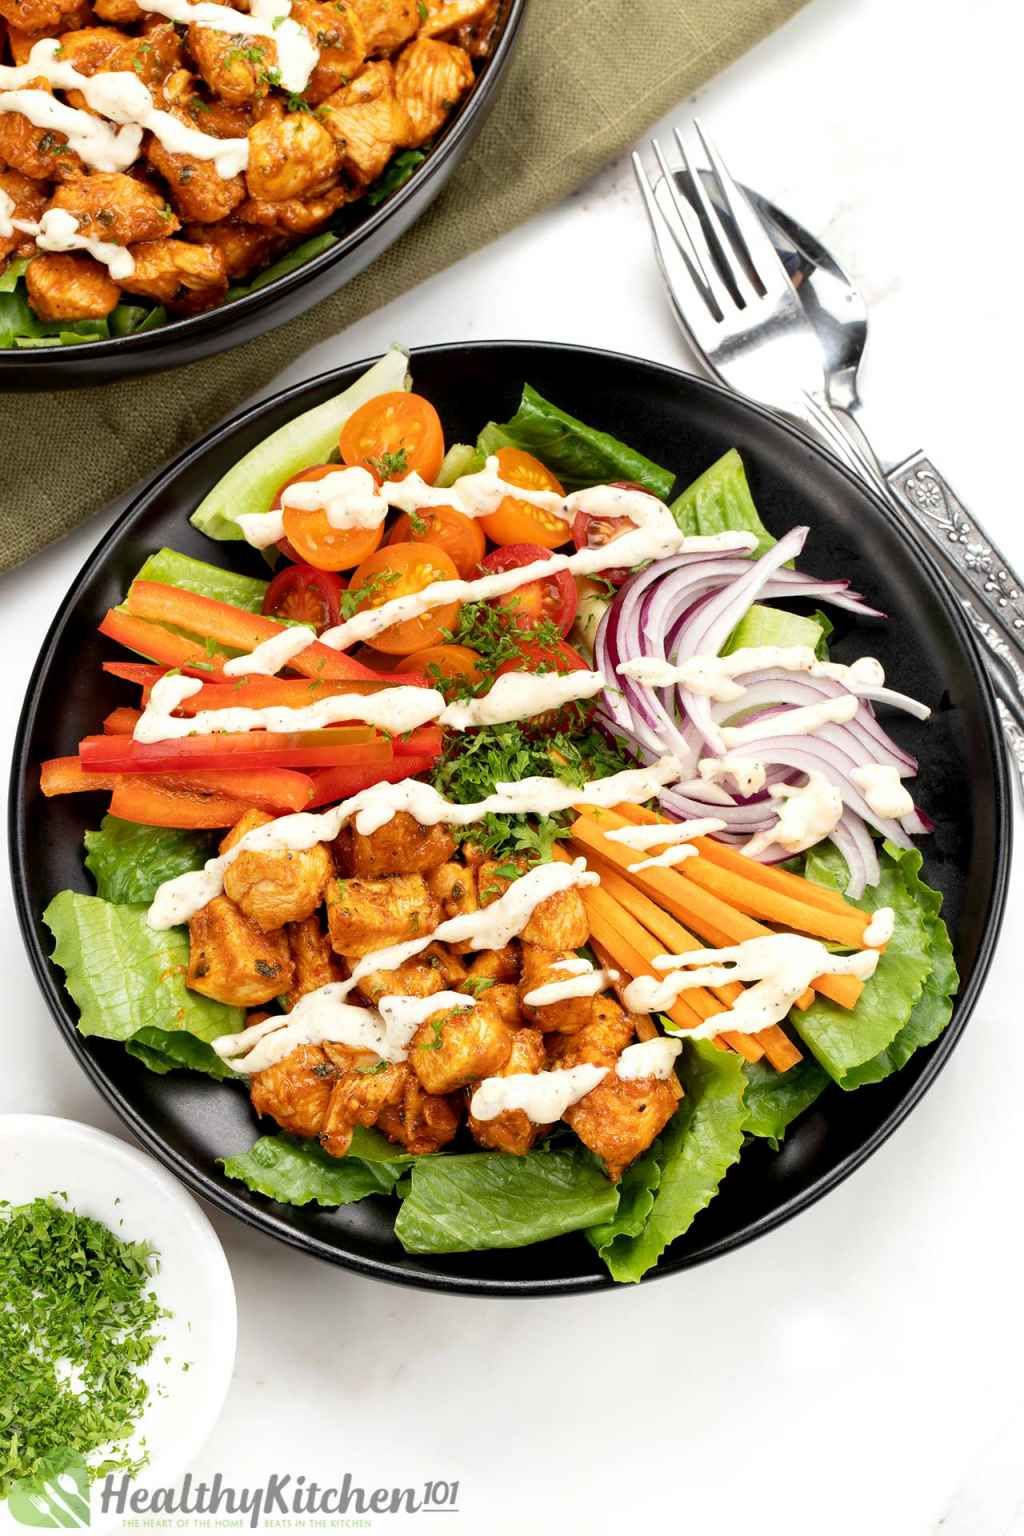 Buffalo Chicken Salad Recipe: A Low-Carb And Low-Calorie Salad